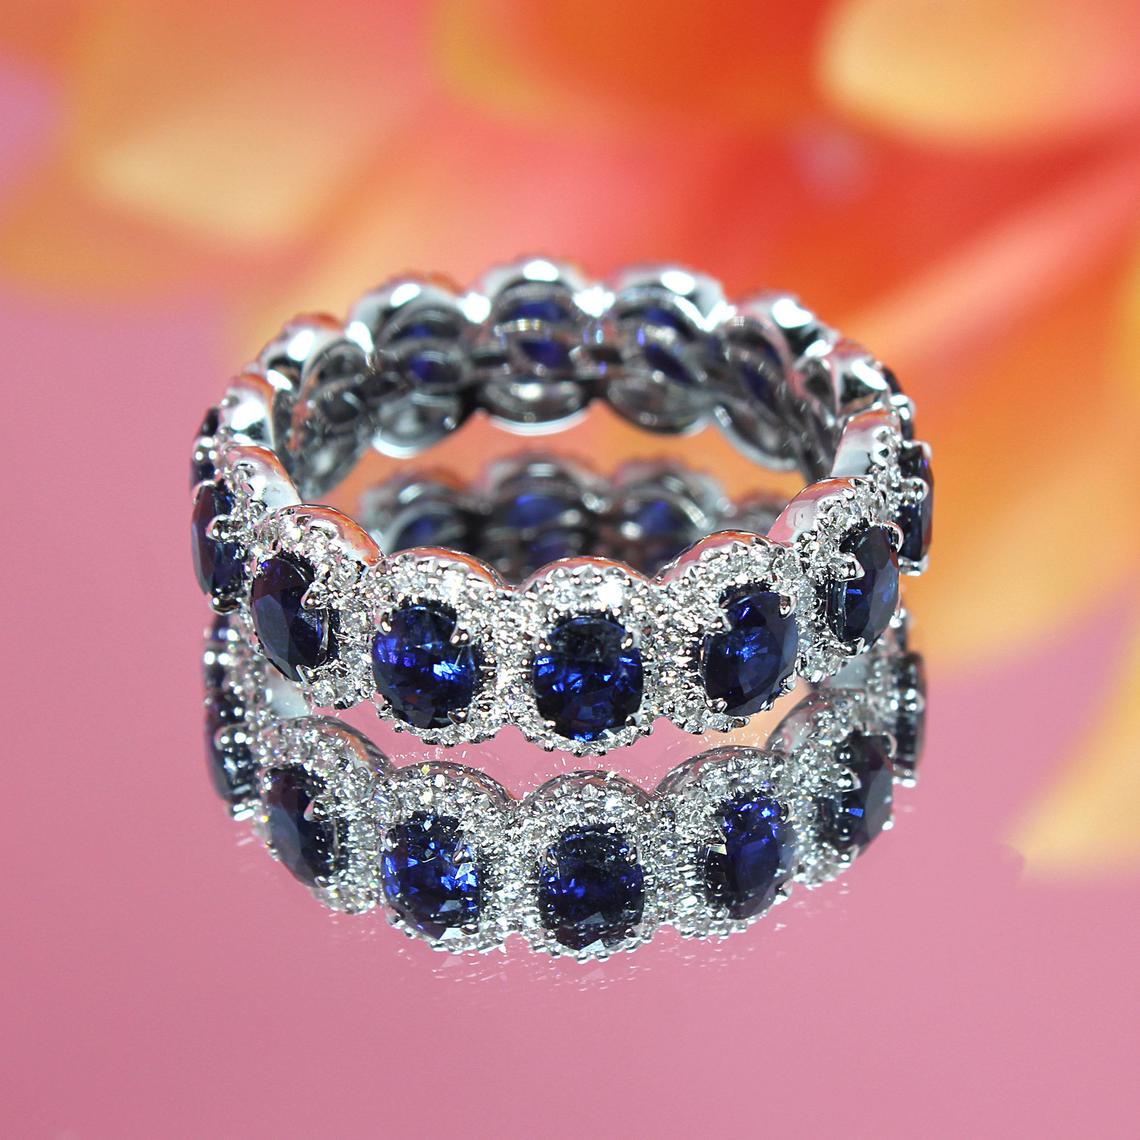 3.05 ct. Genuine Blue Oval Sapphire Eternity Ring With 0.68 ct. Diamonds Halo-in 14K/18K White, Yellow, Rose Gold and Platinum - Christmas Jewelry Gift -VIRABYANI